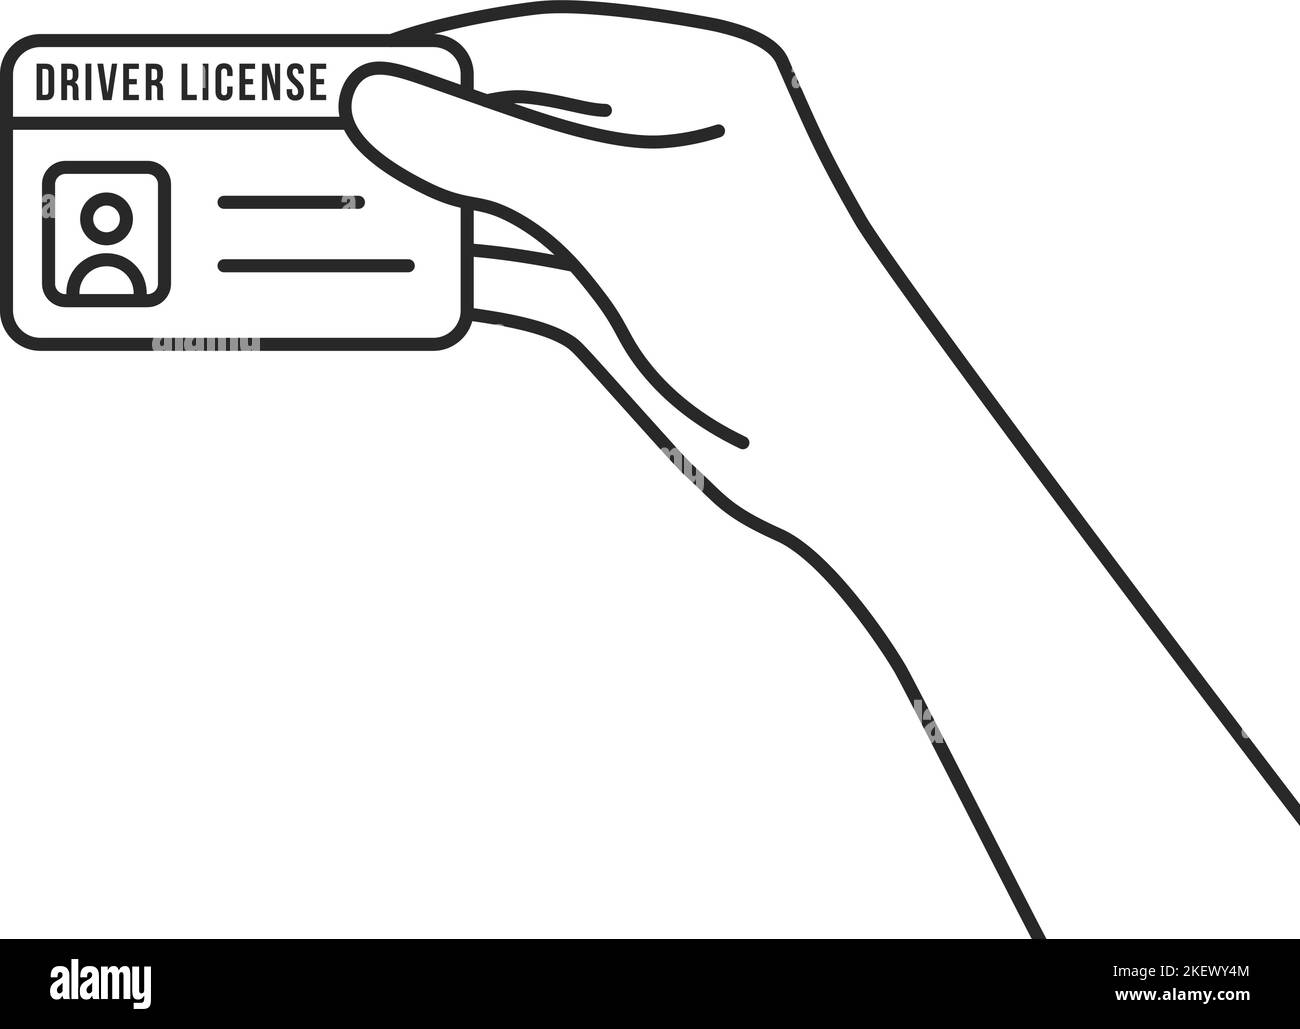 hand holding thin line driver license Stock Vector